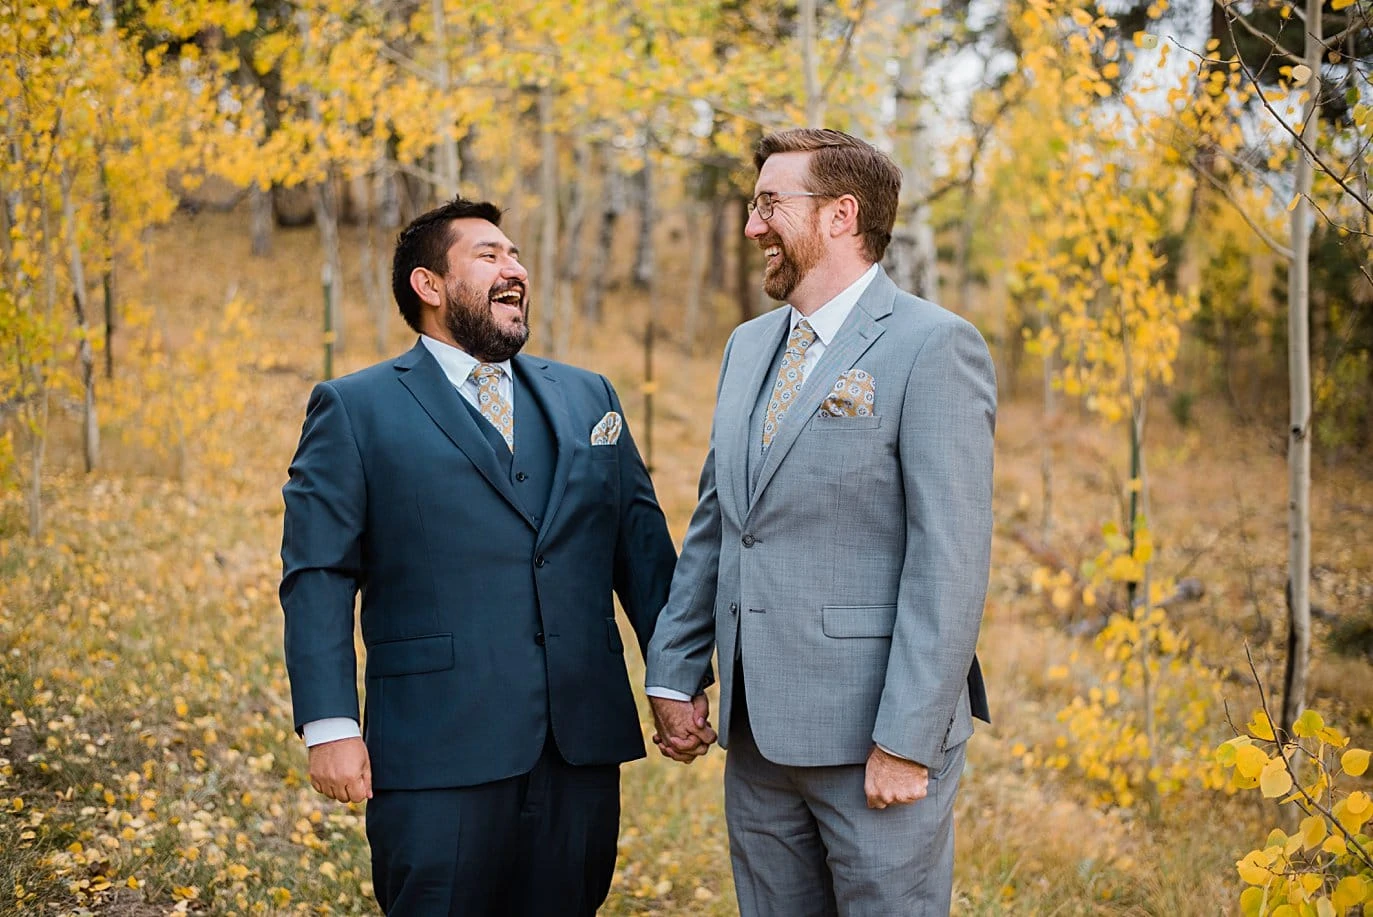 two grooms in navy and gray suits laugh in fall aspen trees in Golden Gate Canyon by Colorado gay wedding photographer Jennie Crate